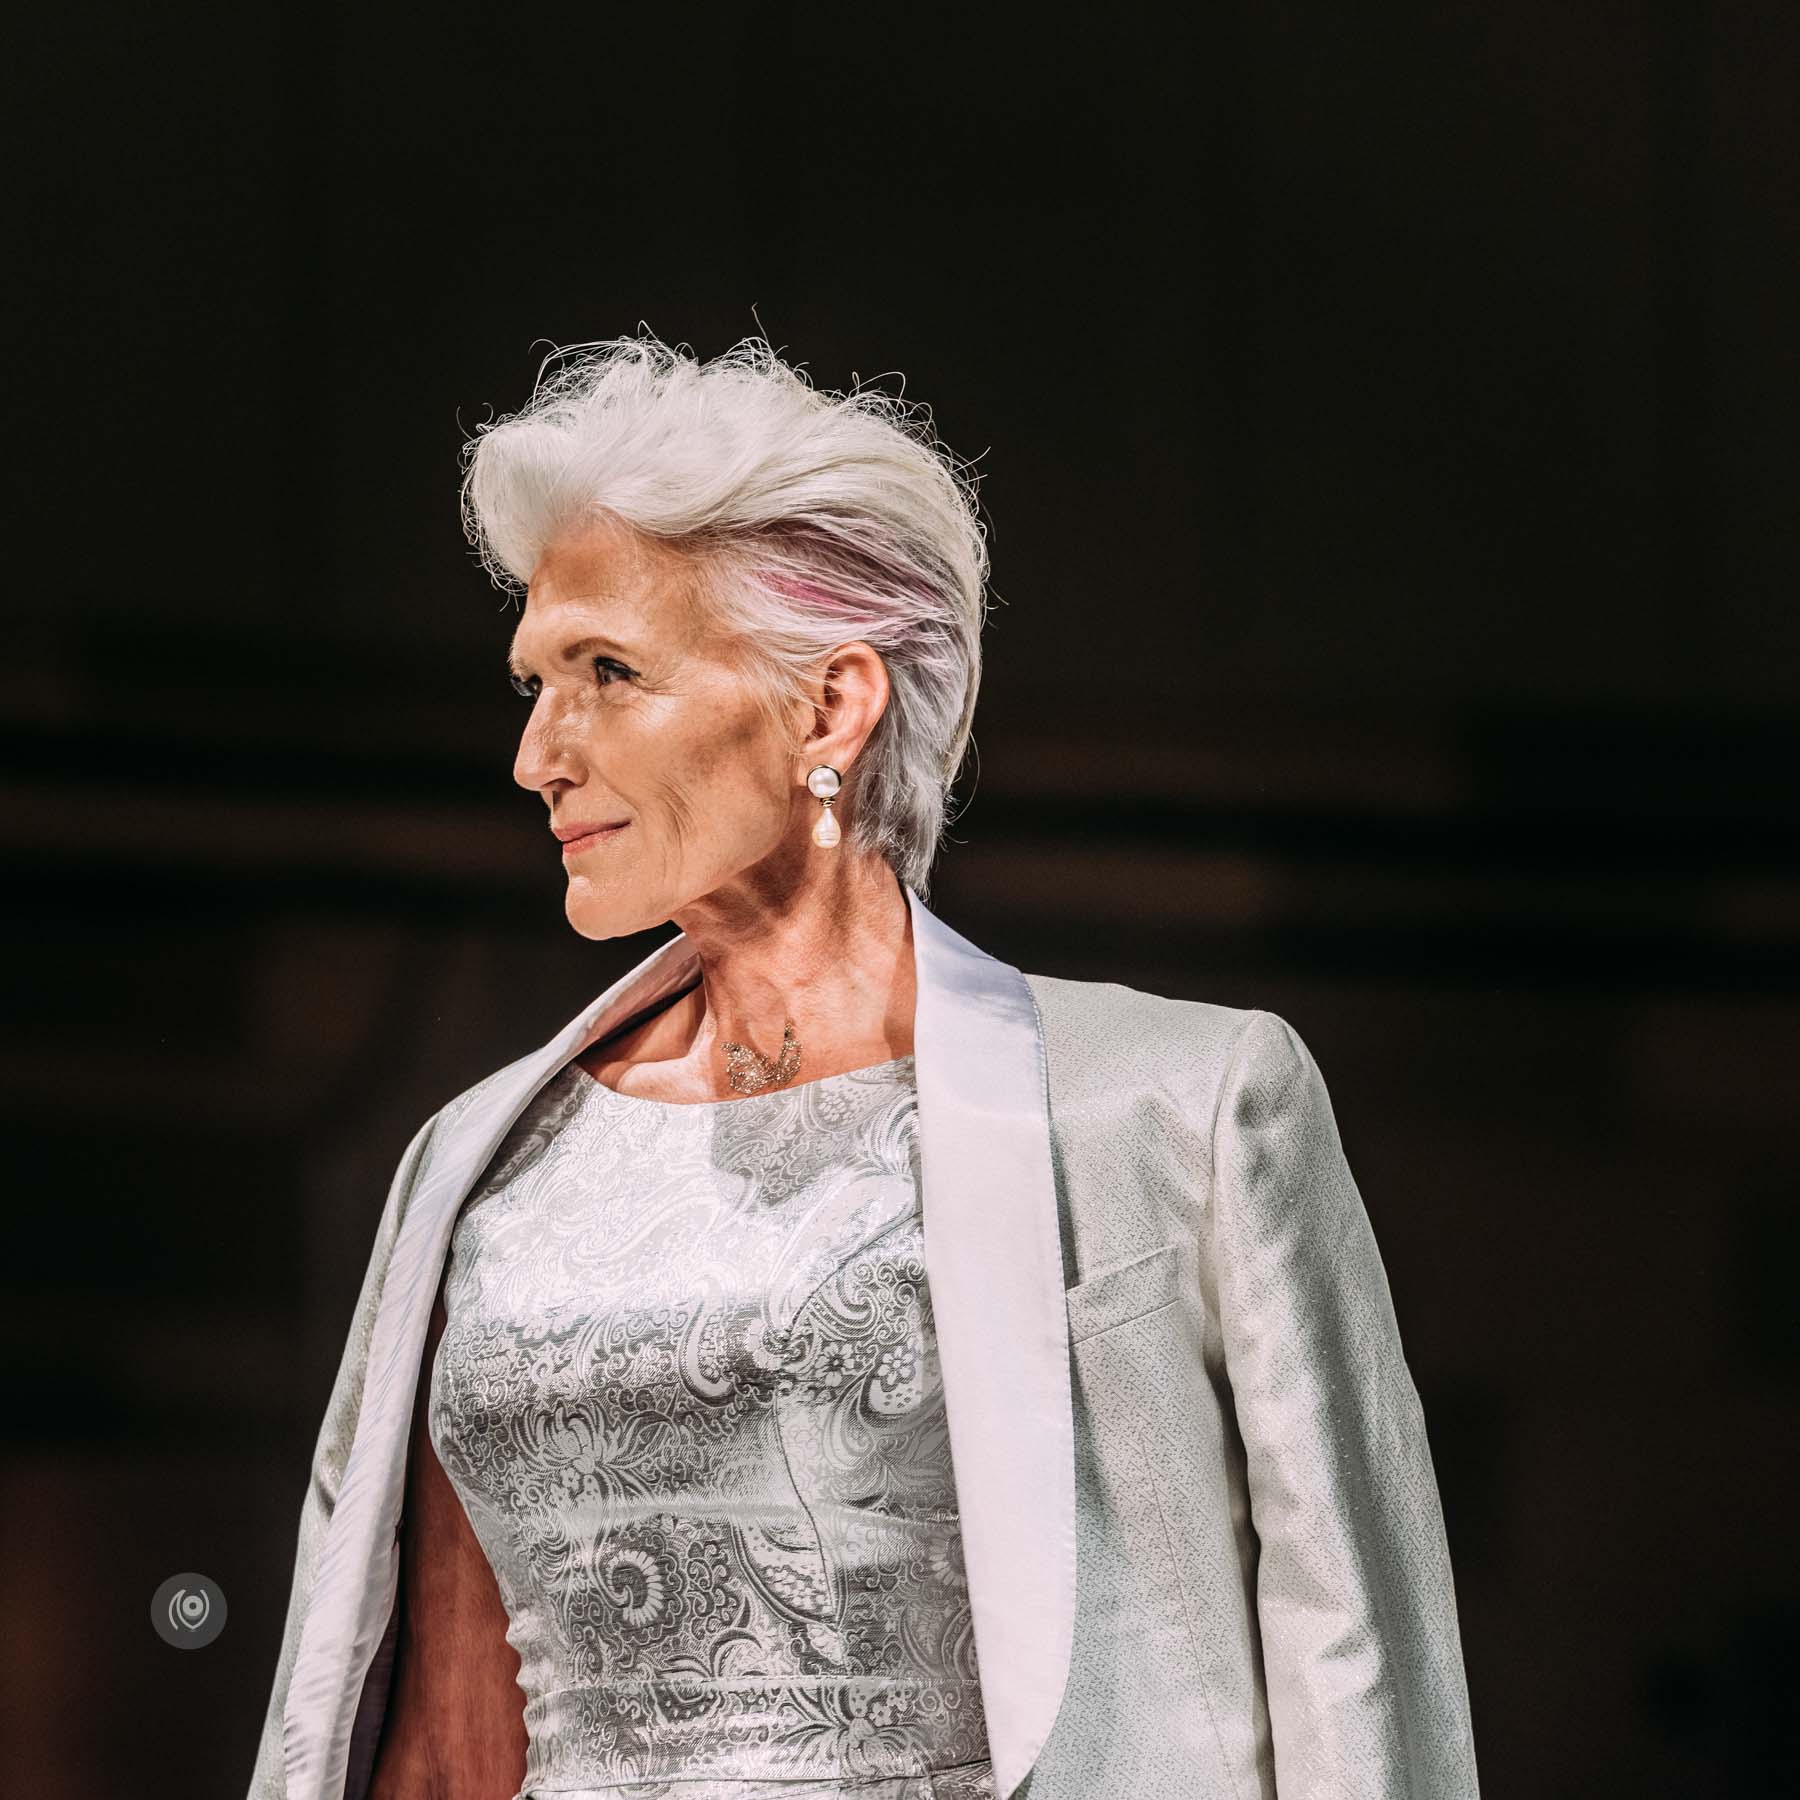 naina.co, naina redhu, maye musk, elon musk mother, 70 years old, model, older model, dietician, nutritionist, malan breton, new york fashion week, NYFW, september 2015, new york, new york city, NCY, fashion week, runway, ramp, photographer, content queen, eyesforcontent, fashion model, elon musk, luxury, lifestyle, blogger, content creator